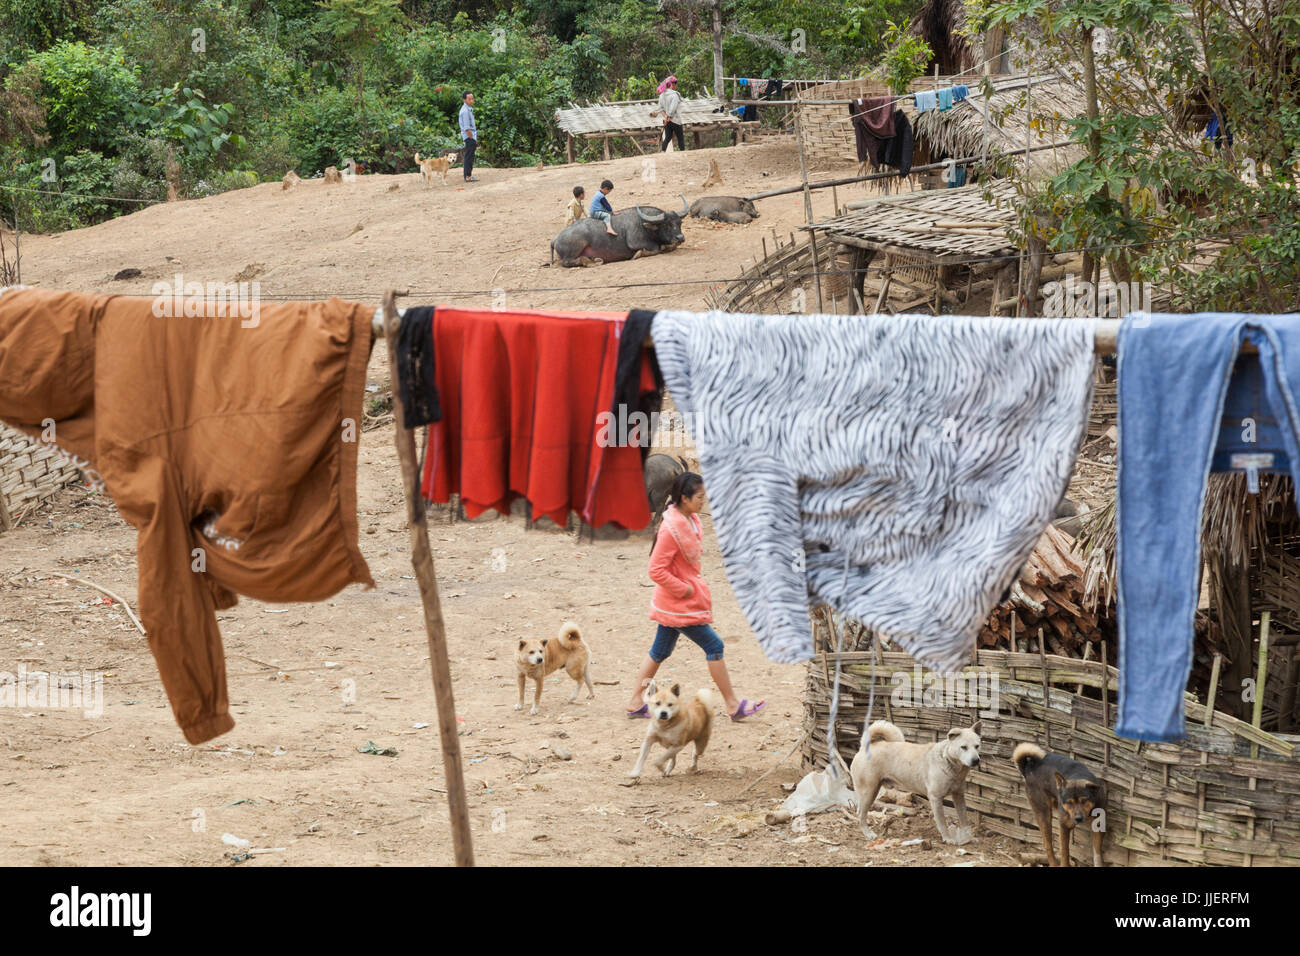 Boys ride a water buffalo among dogs, pigs, and drying clothes in Ban Sop Kha, Laos. Stock Photo